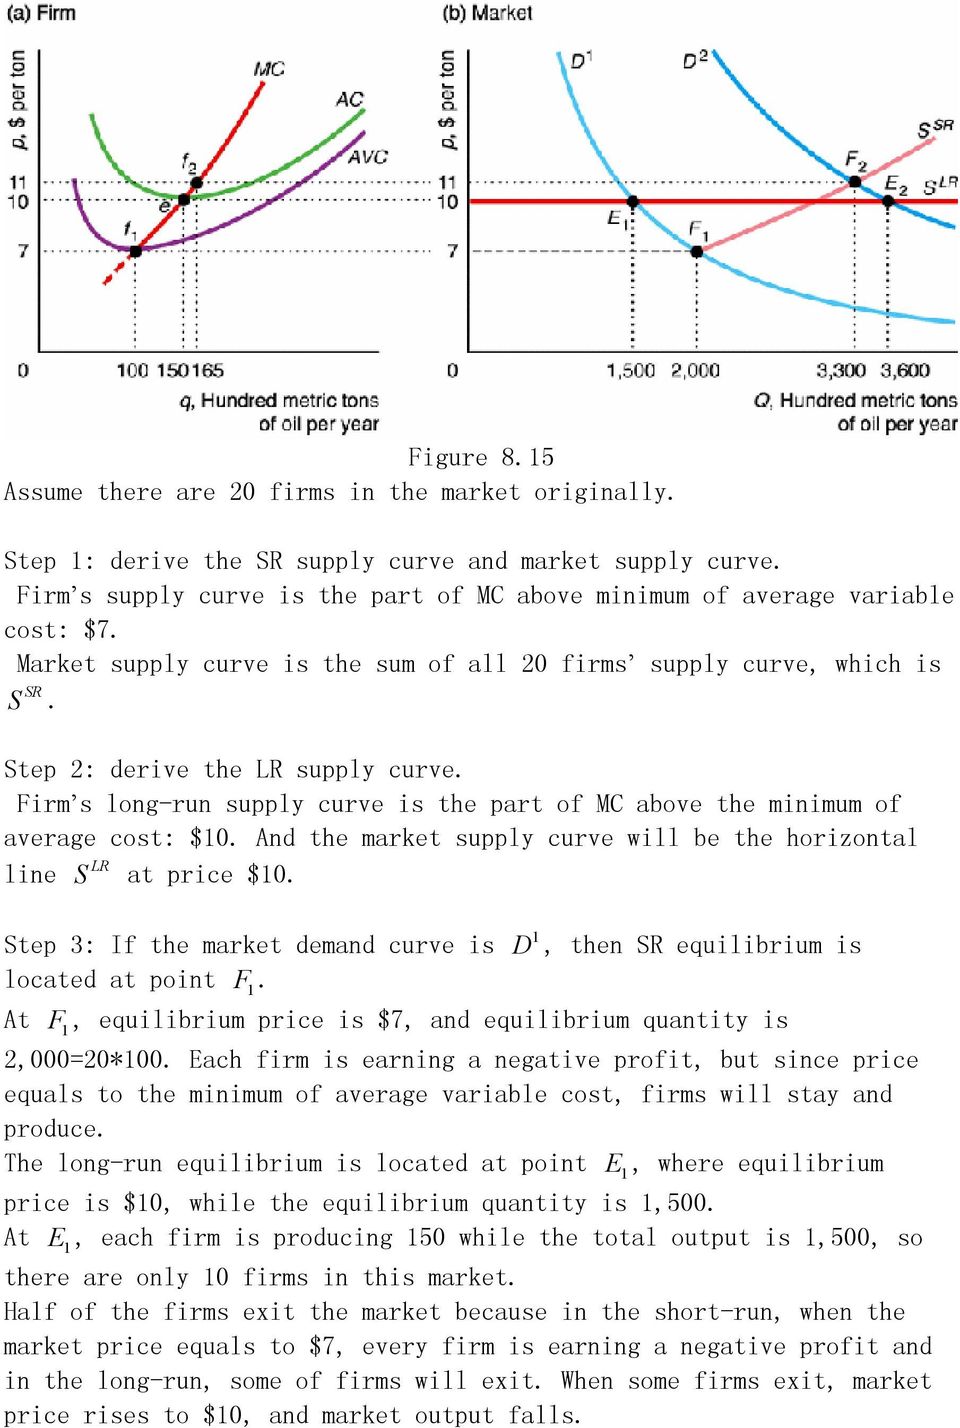 Firm s long-run supply curve is the part of MC above the minimum of average cost: $10. And the market supply curve will be the horizontal line S LR at price $10.